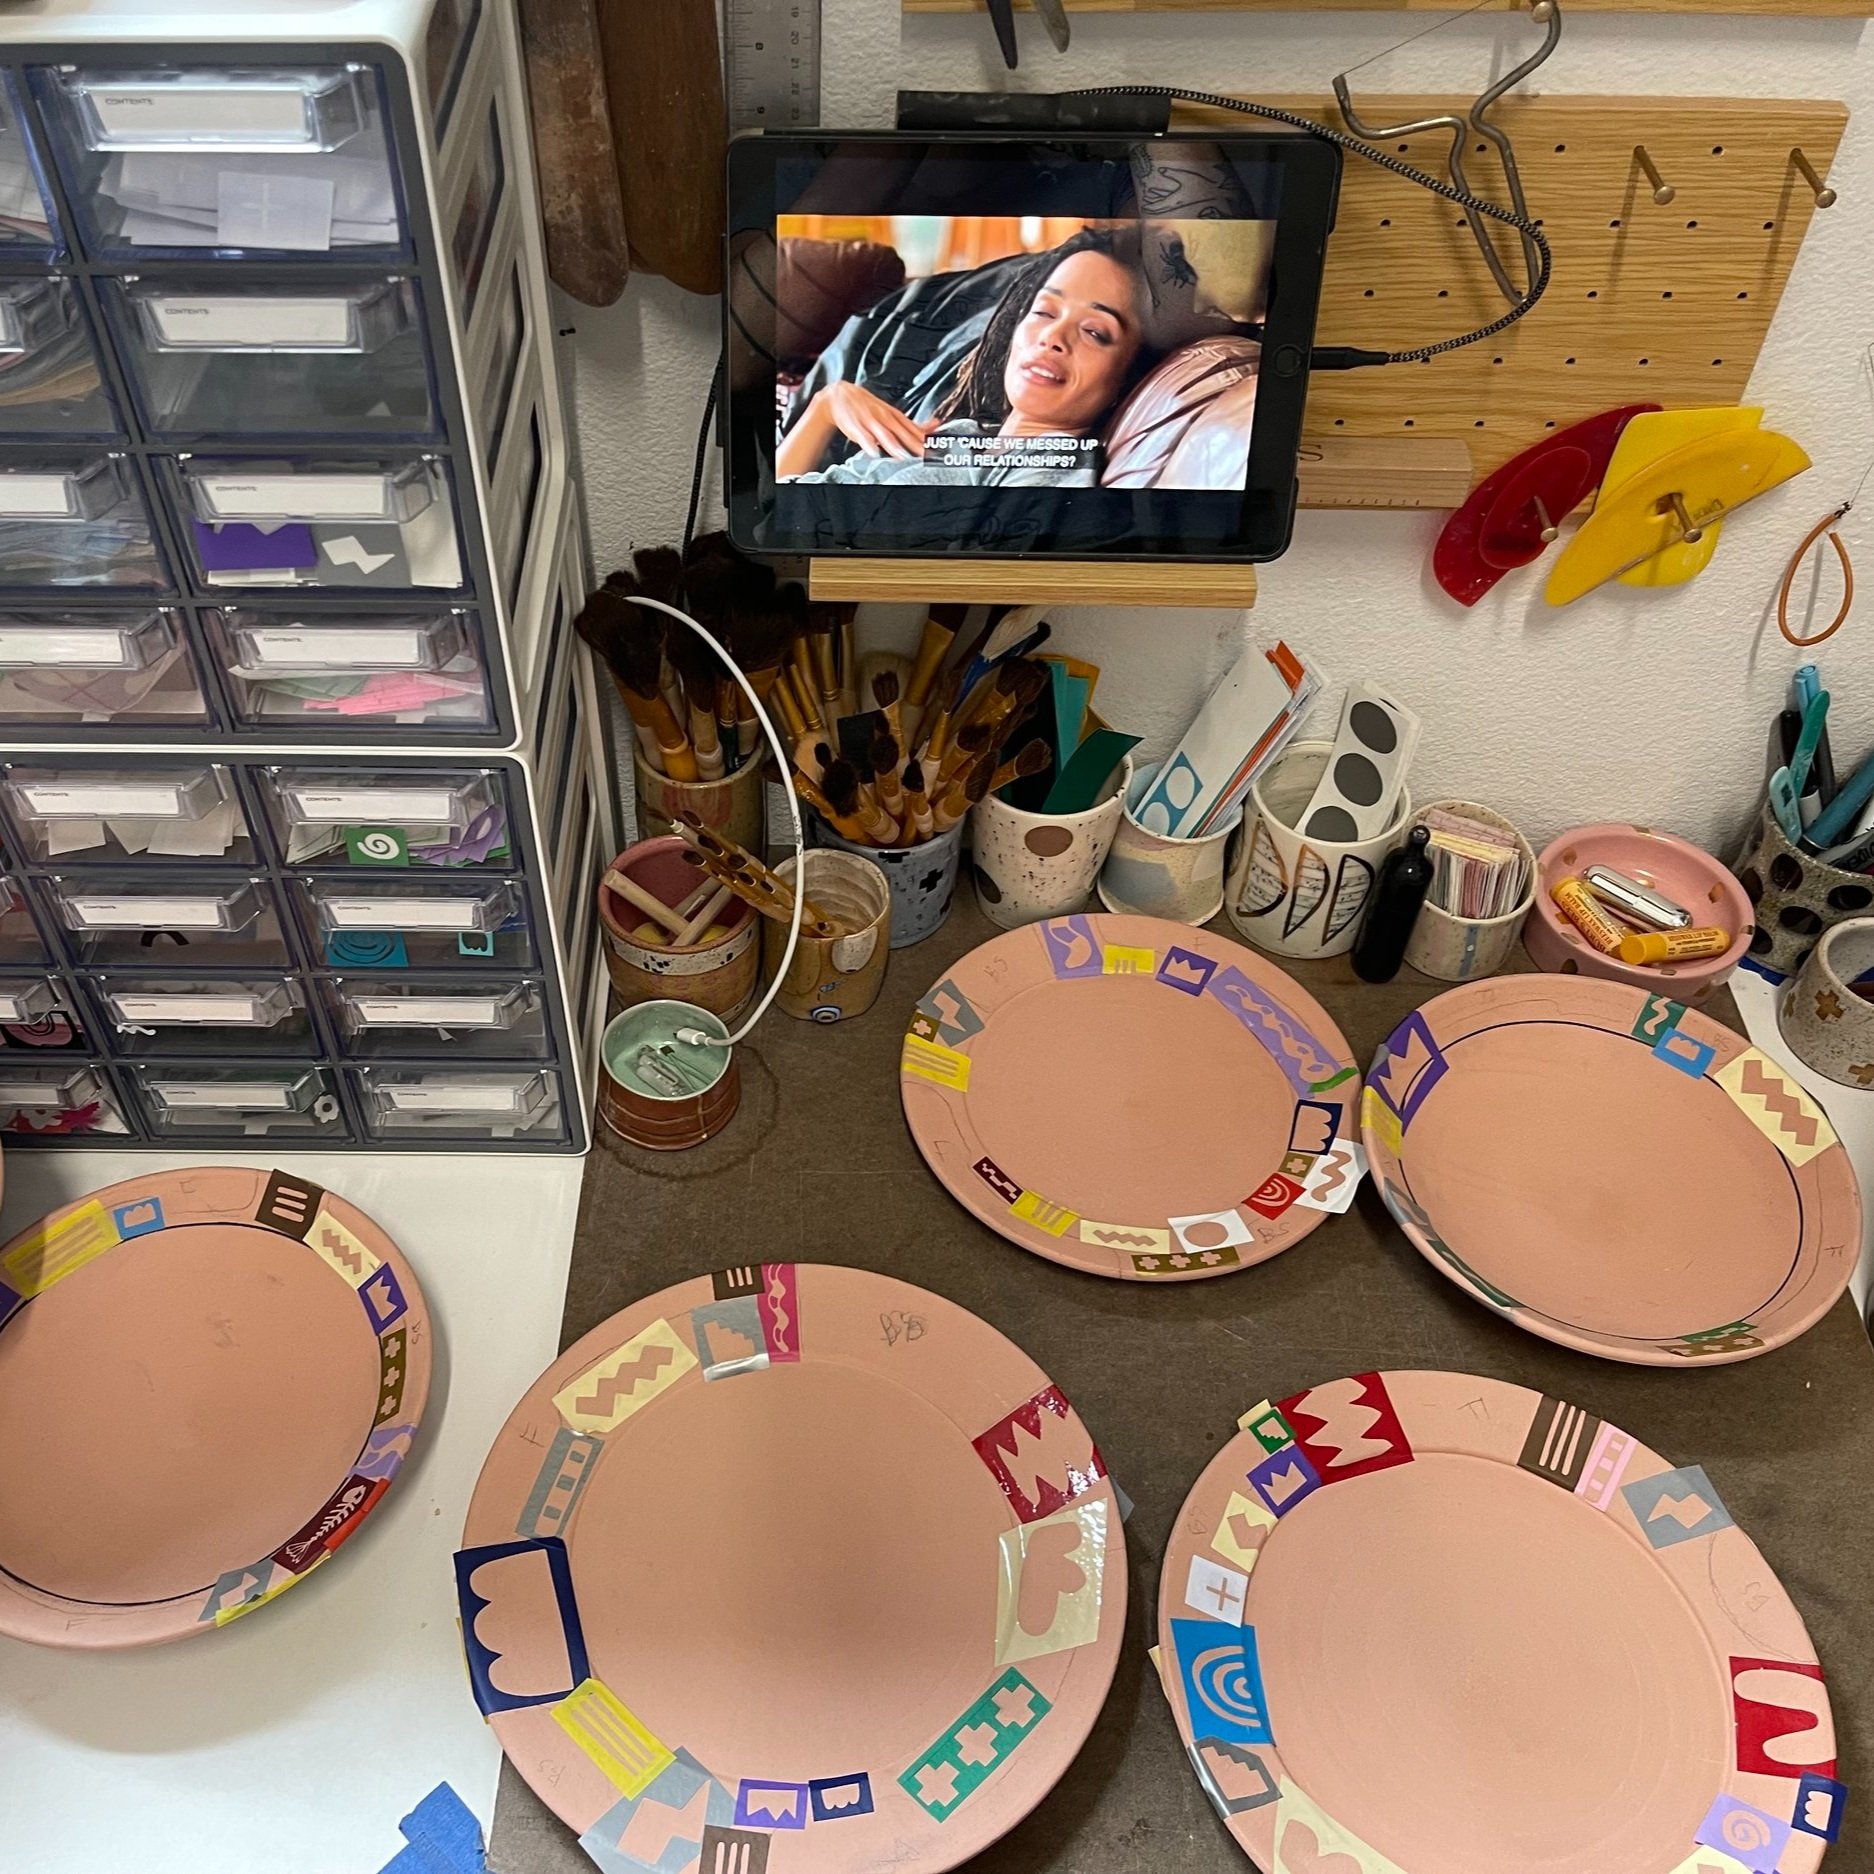  To the left: Organizational drawers for allllll of my stencils for glazing/decorating.  On the wall: Peg board for all of my most used clay tools  On my working table: also use my seconds pots as a way to organize brushes and tools/materials.     iP